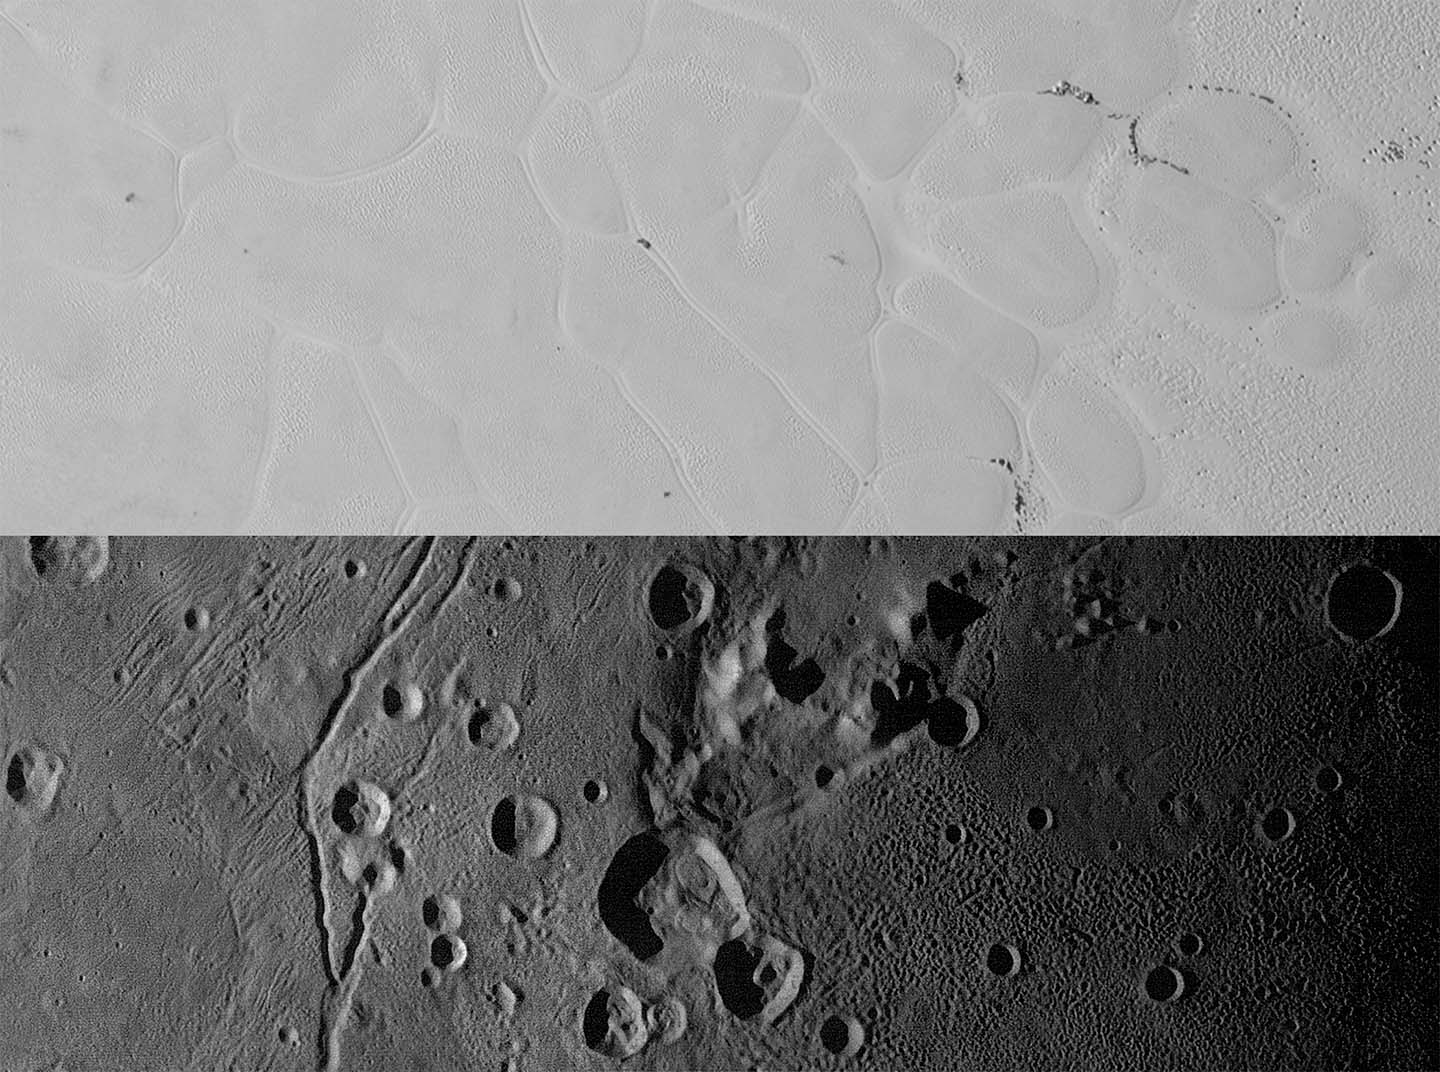 New Horizons’ views of the informally named Sputnik Planum on Pluto (top) and the informally named Vulcan Planum on Charon (bottom)